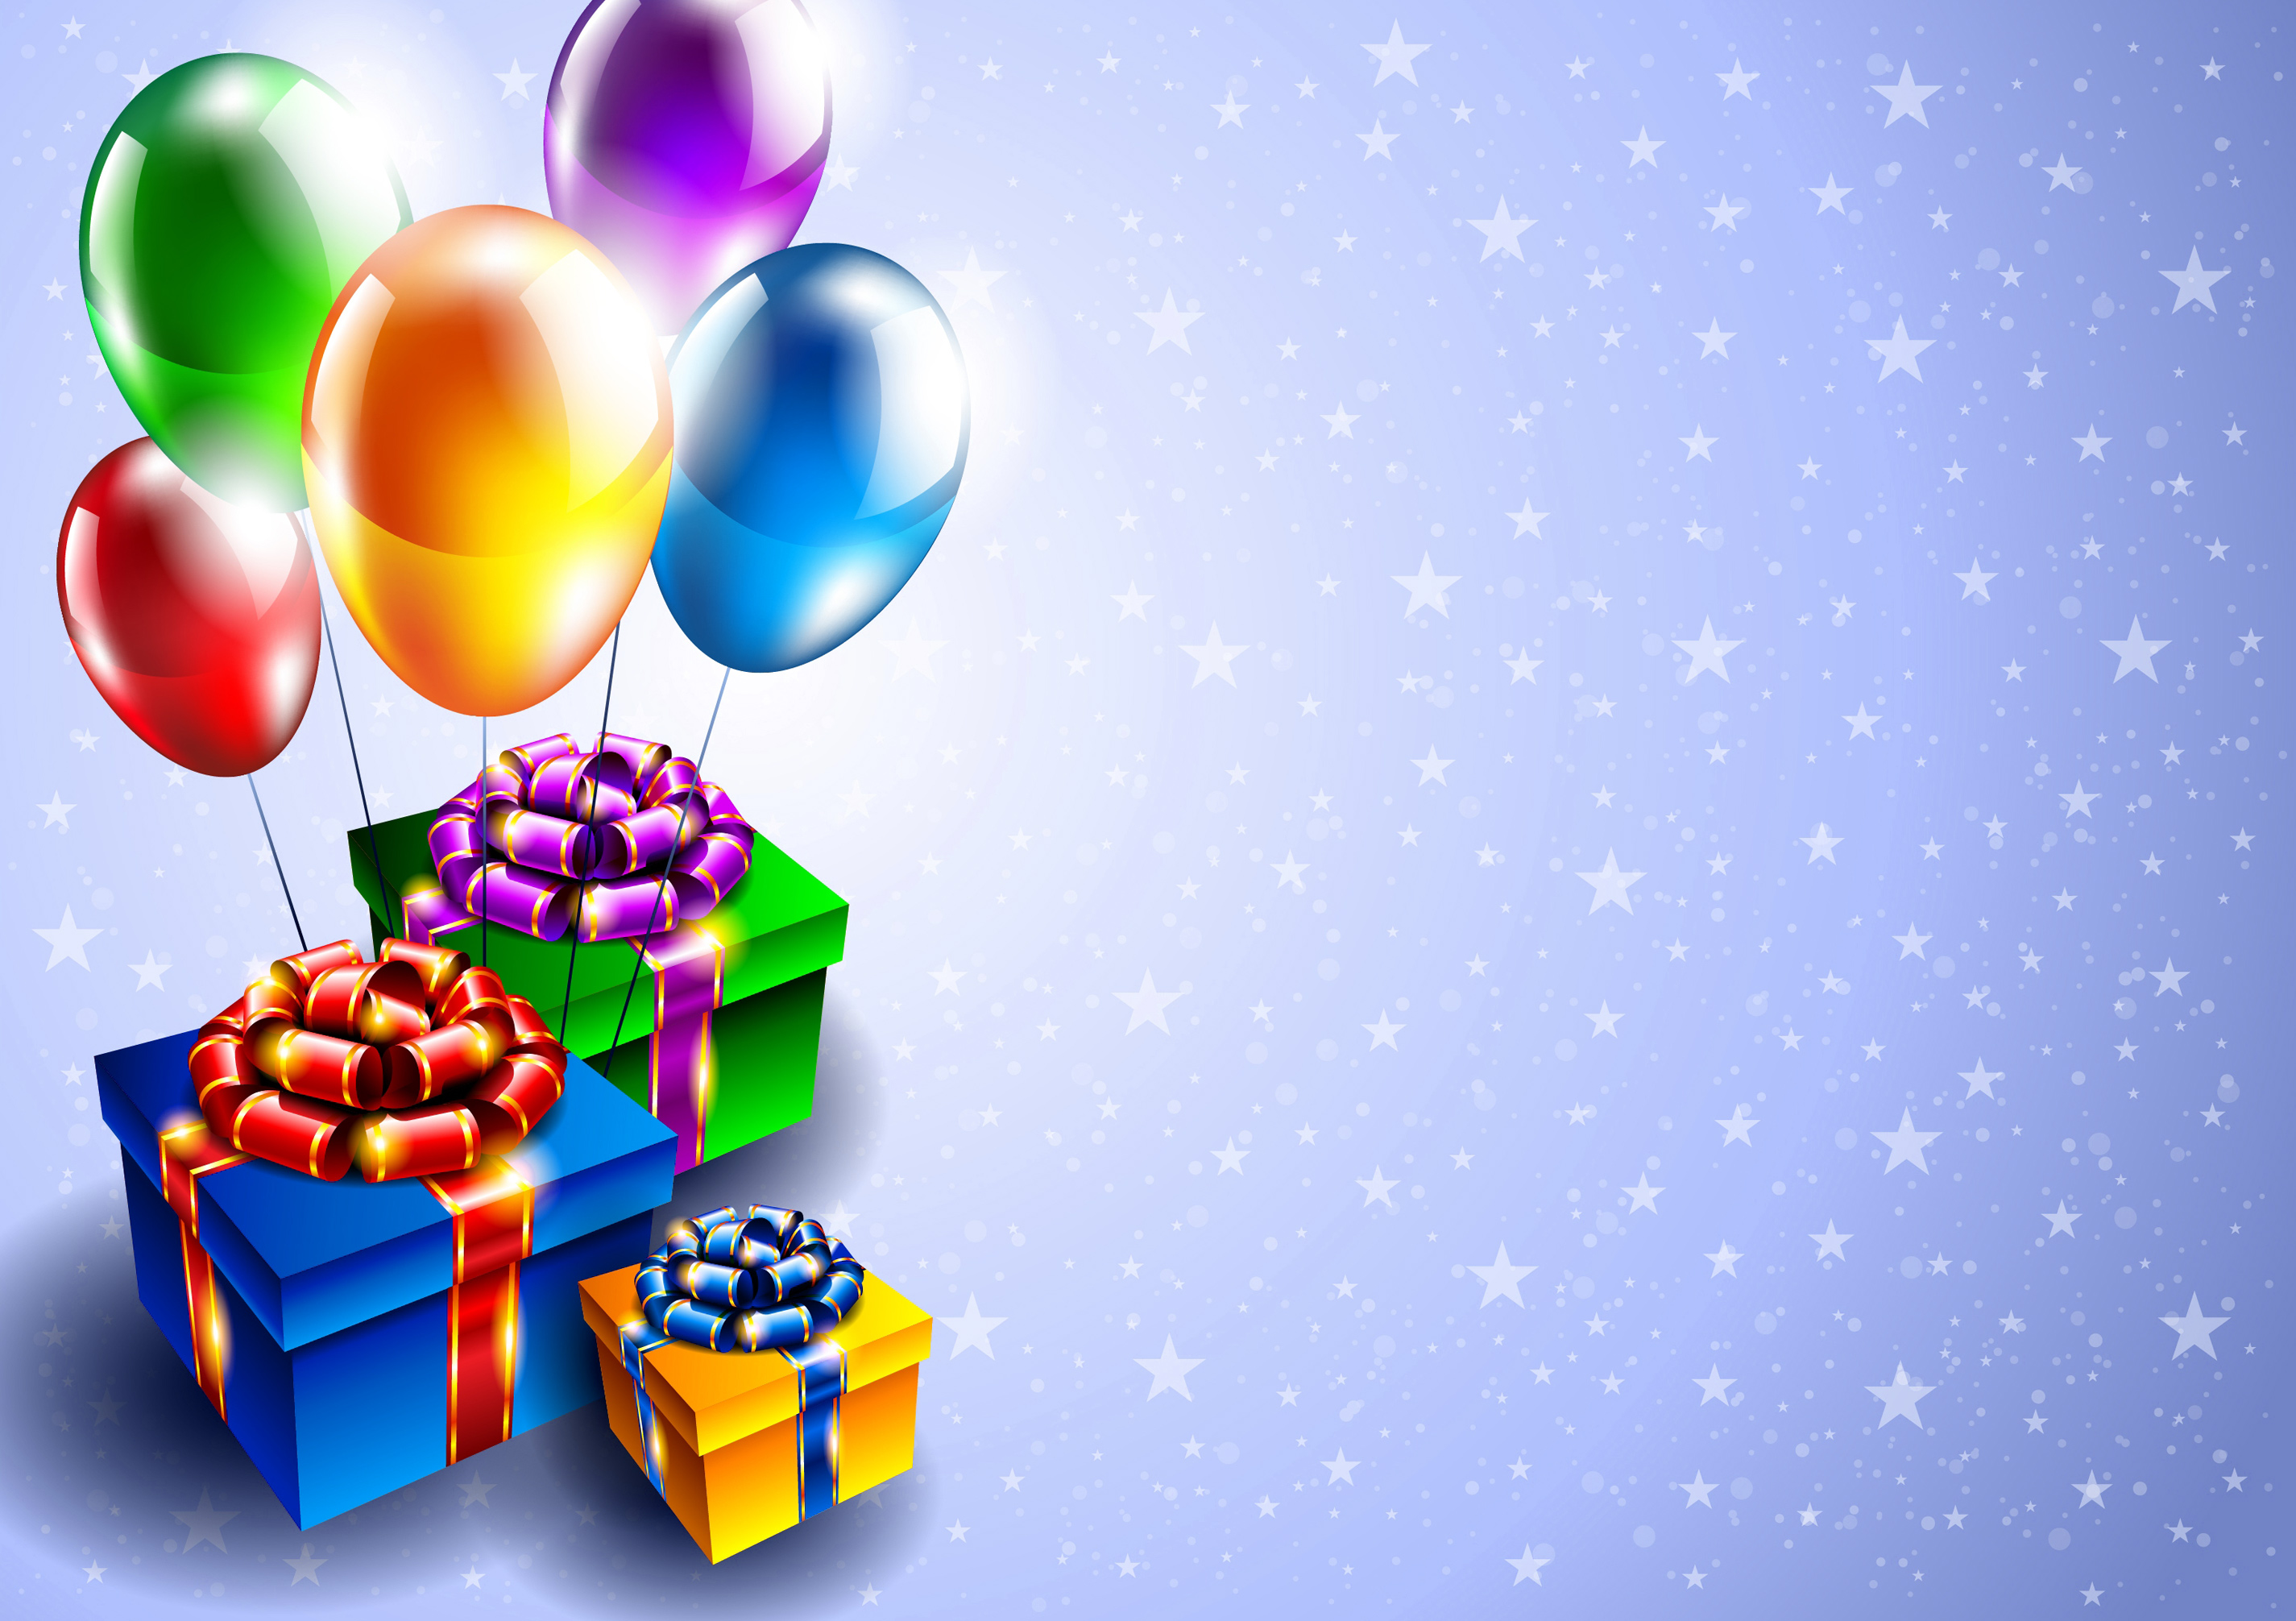 Birthday_Background_with_Gifts jpg?m=1411220100